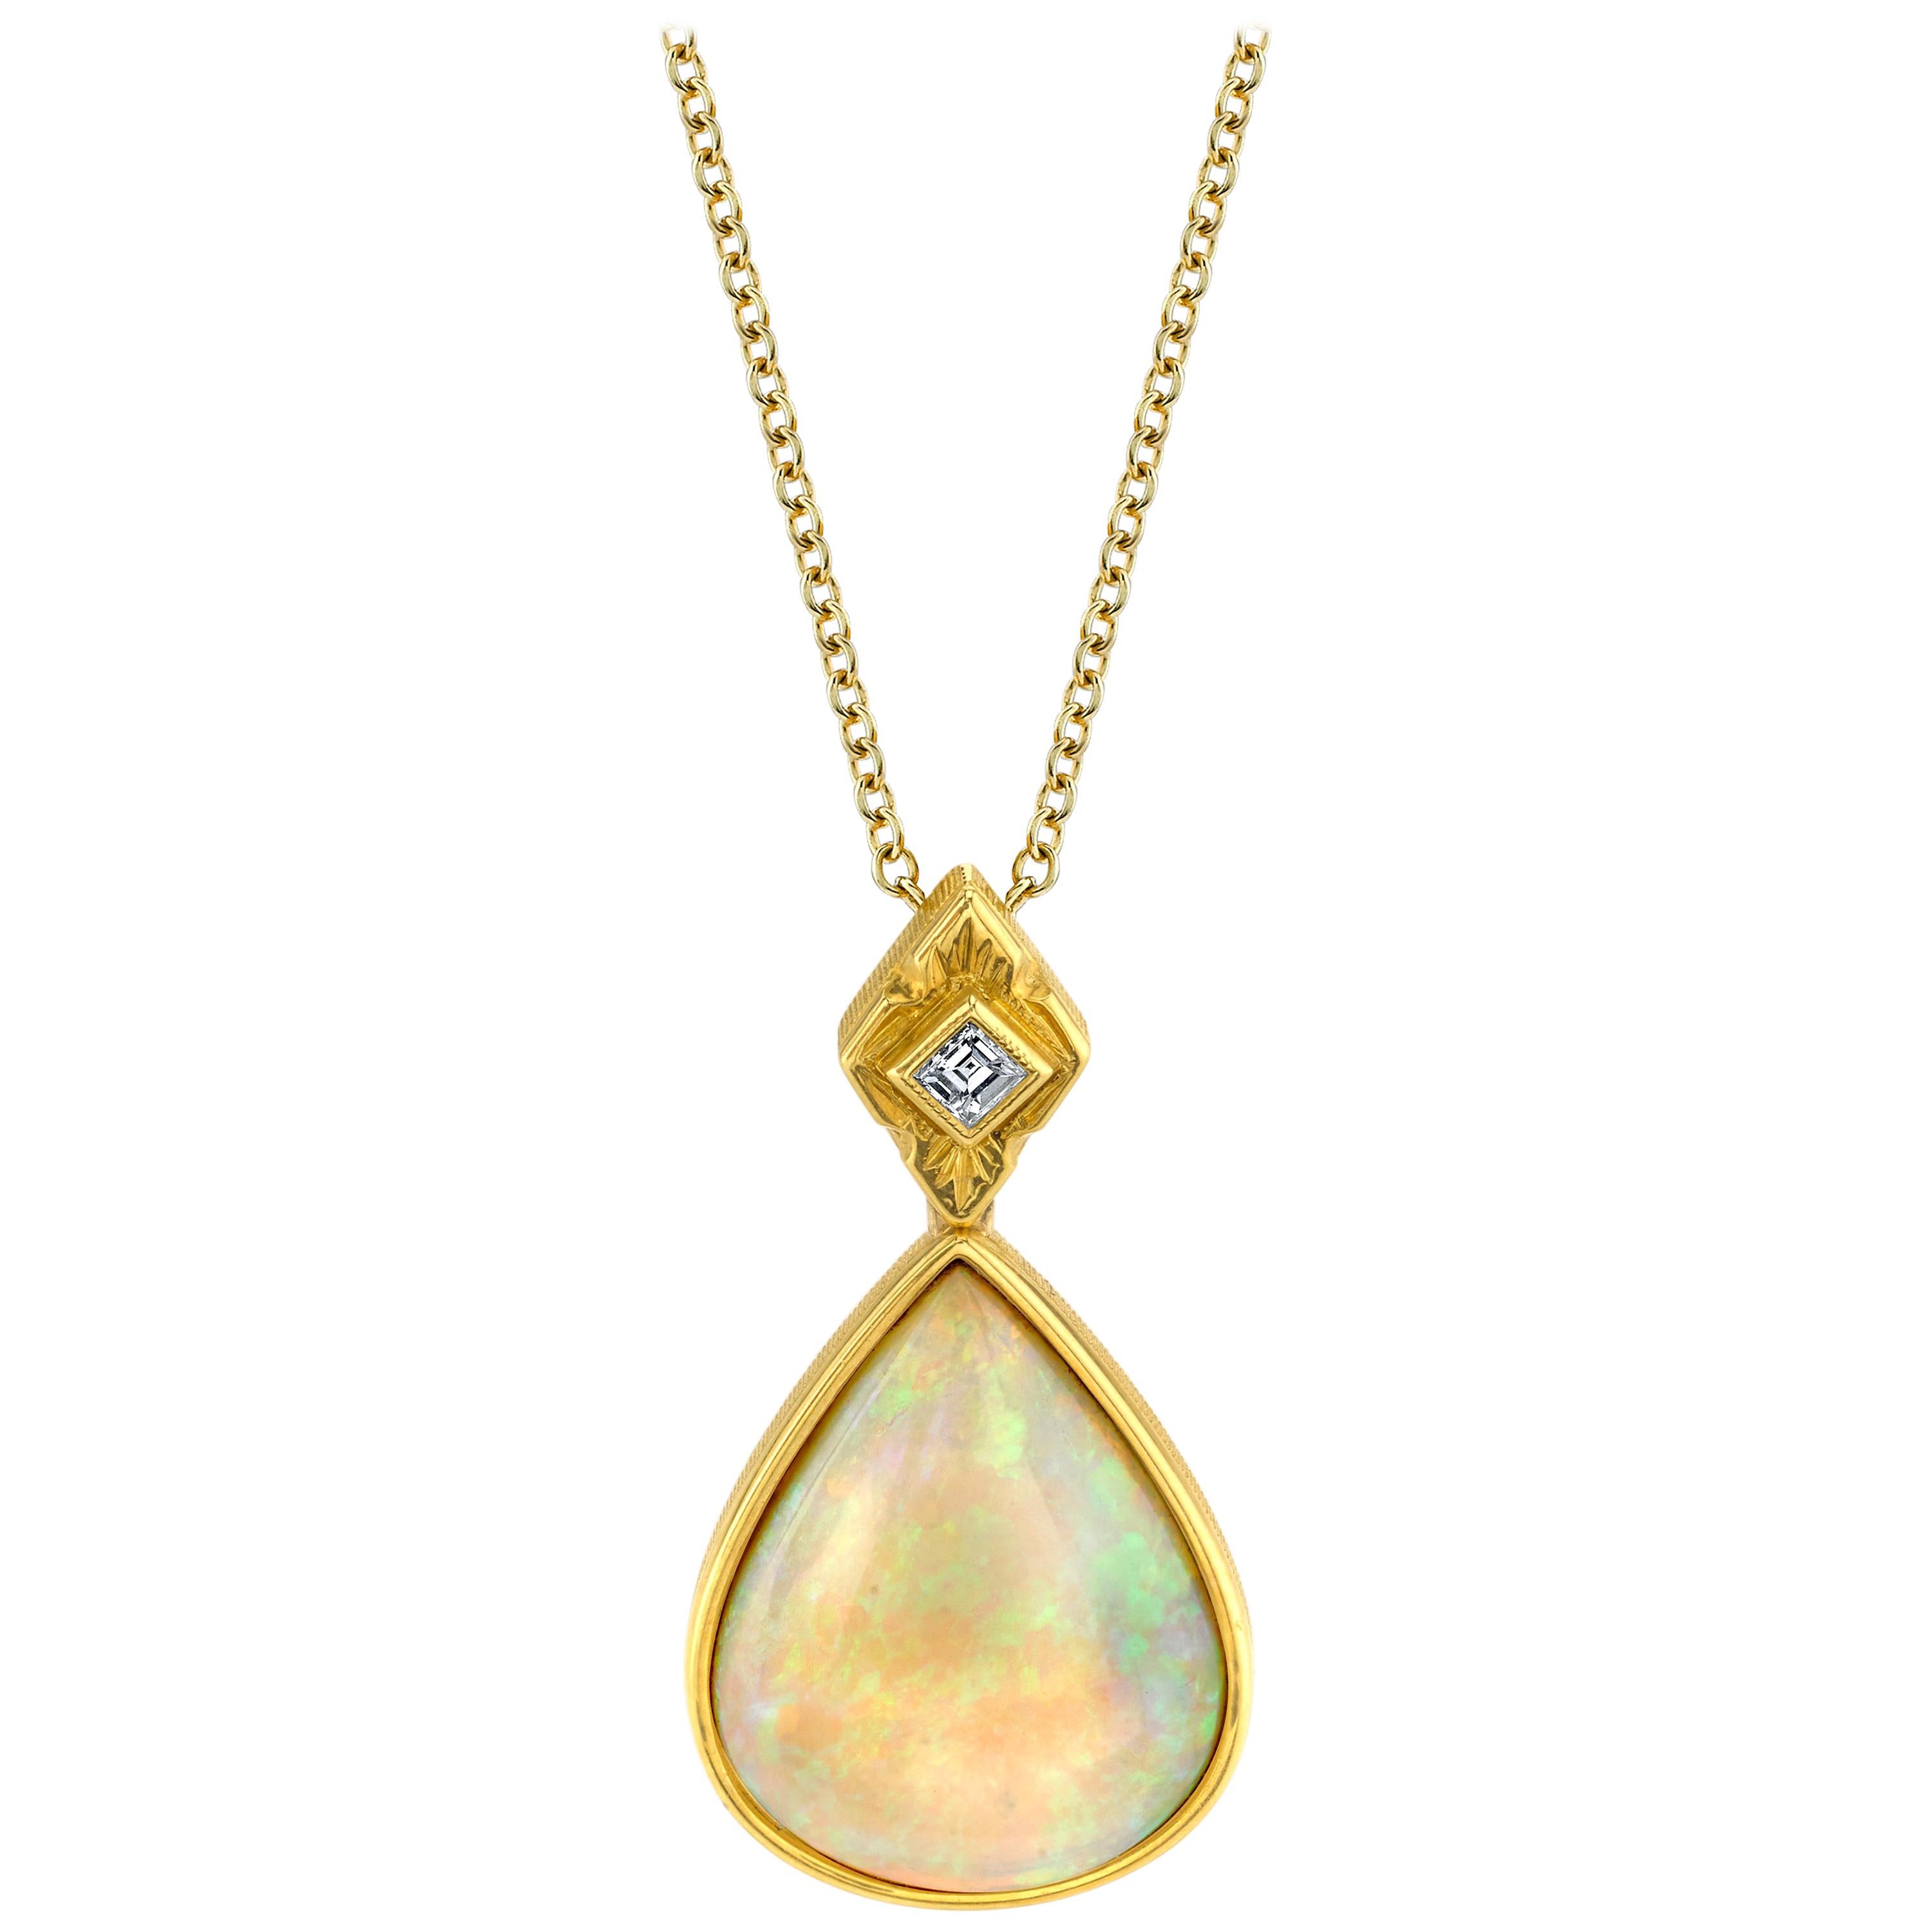 6.83 Carat Pear Shape Opal and Diamond Necklace in 18k Yellow Gold 